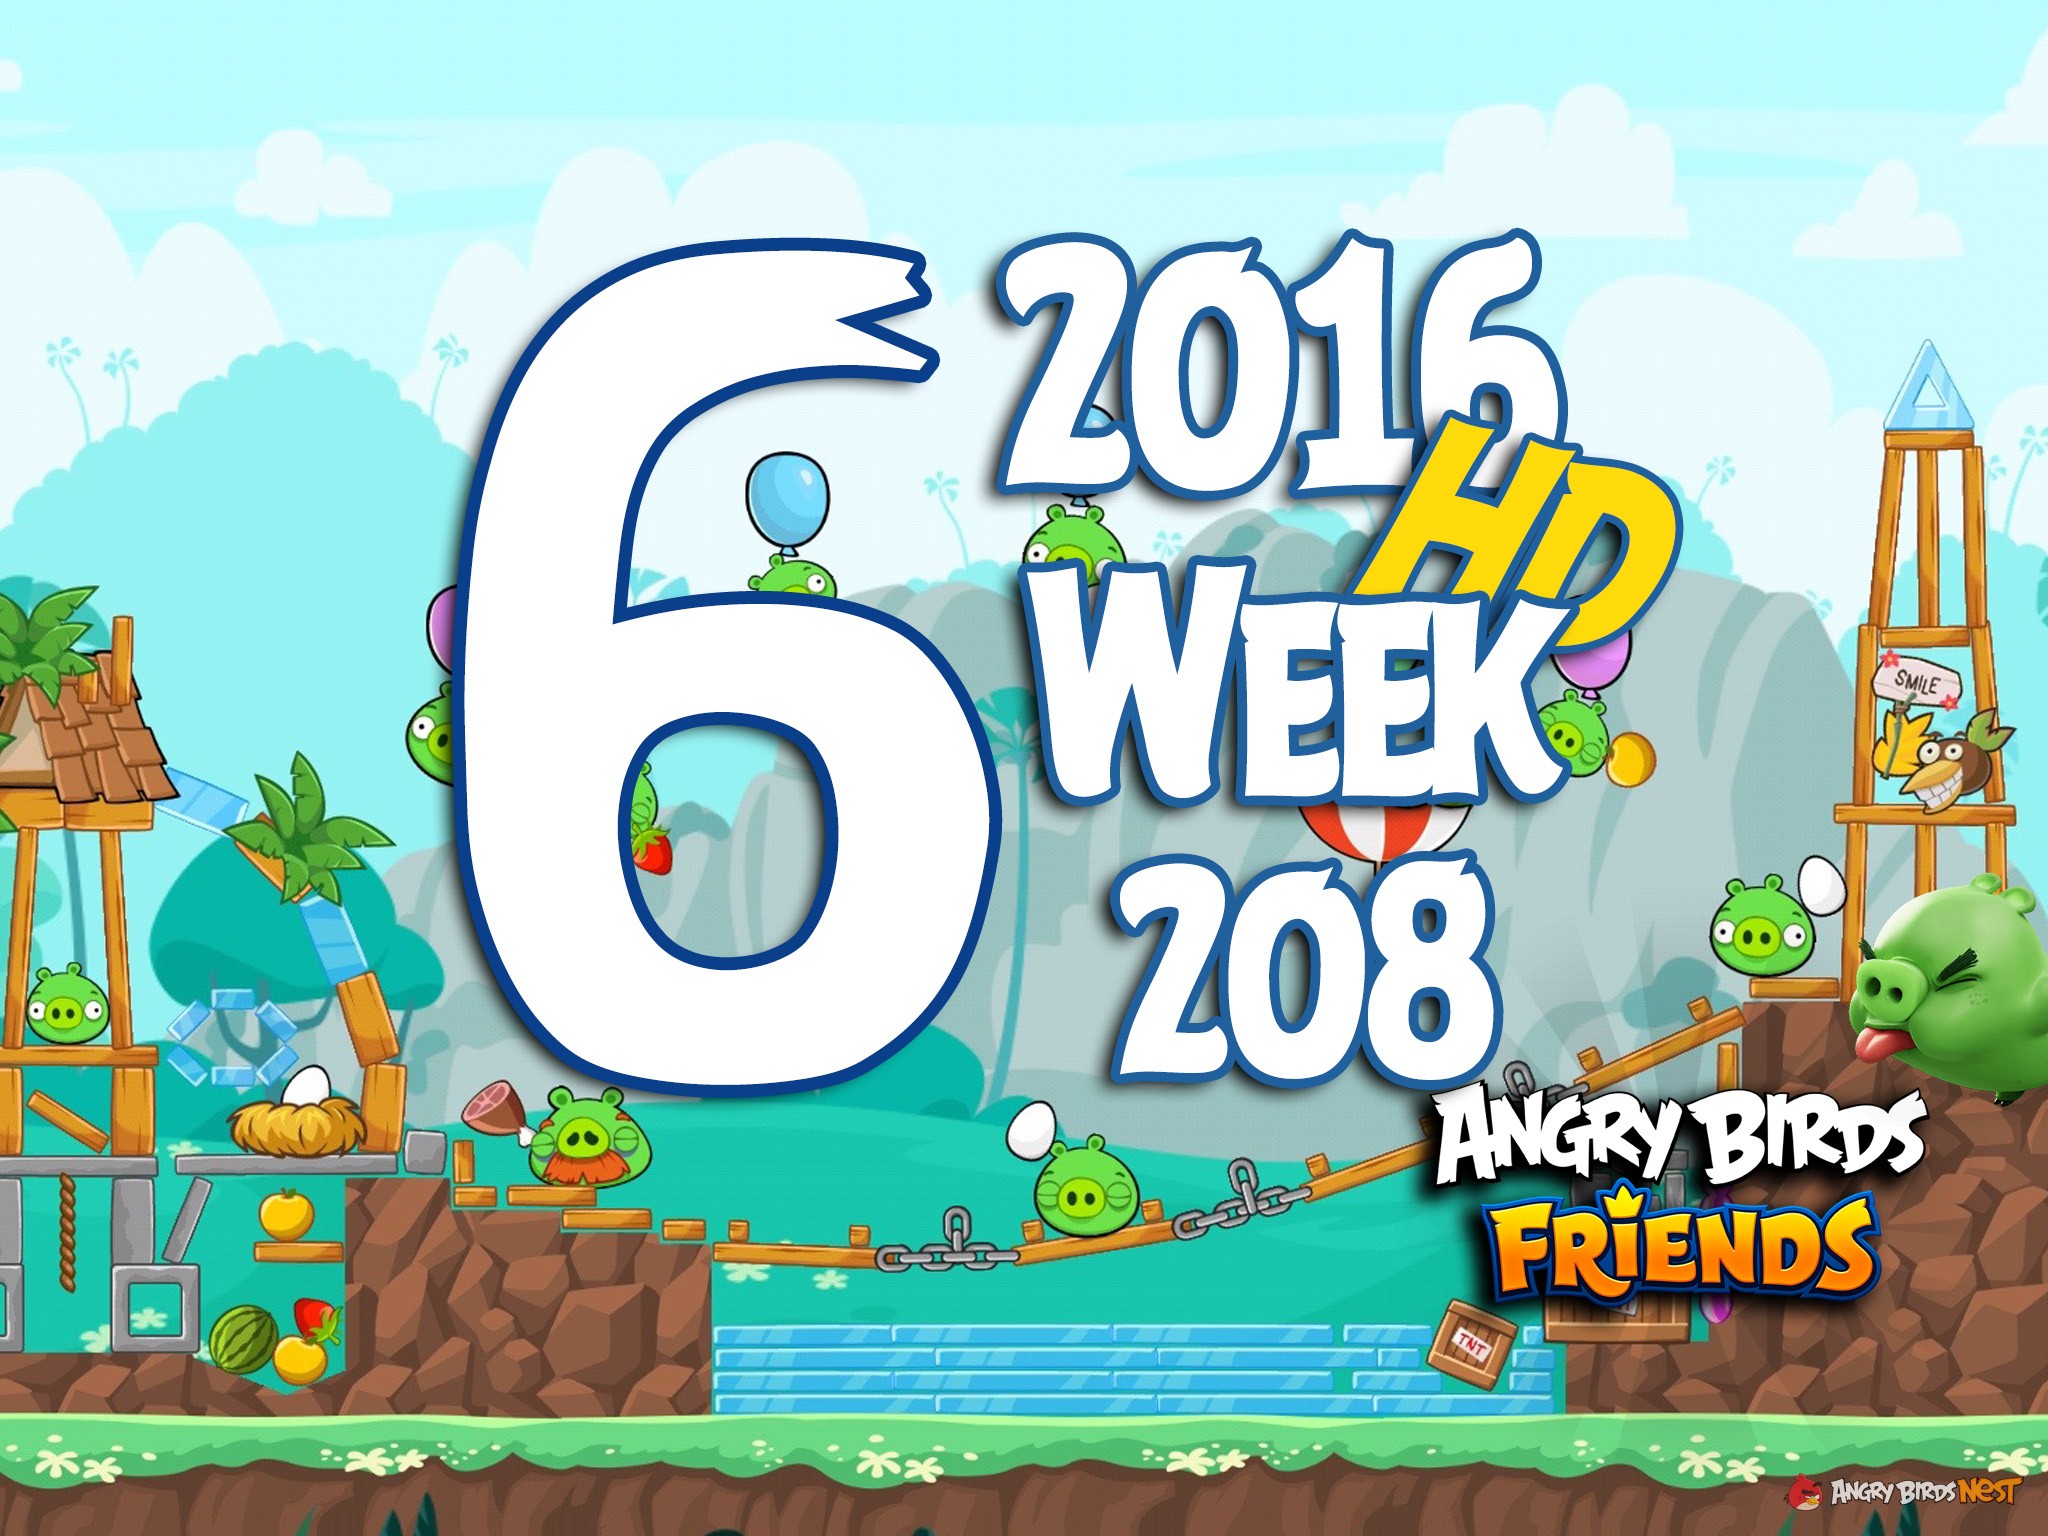 Angry Birds Friends Tournament Level 6 Week 208 Walkthrough | May 12th 2016